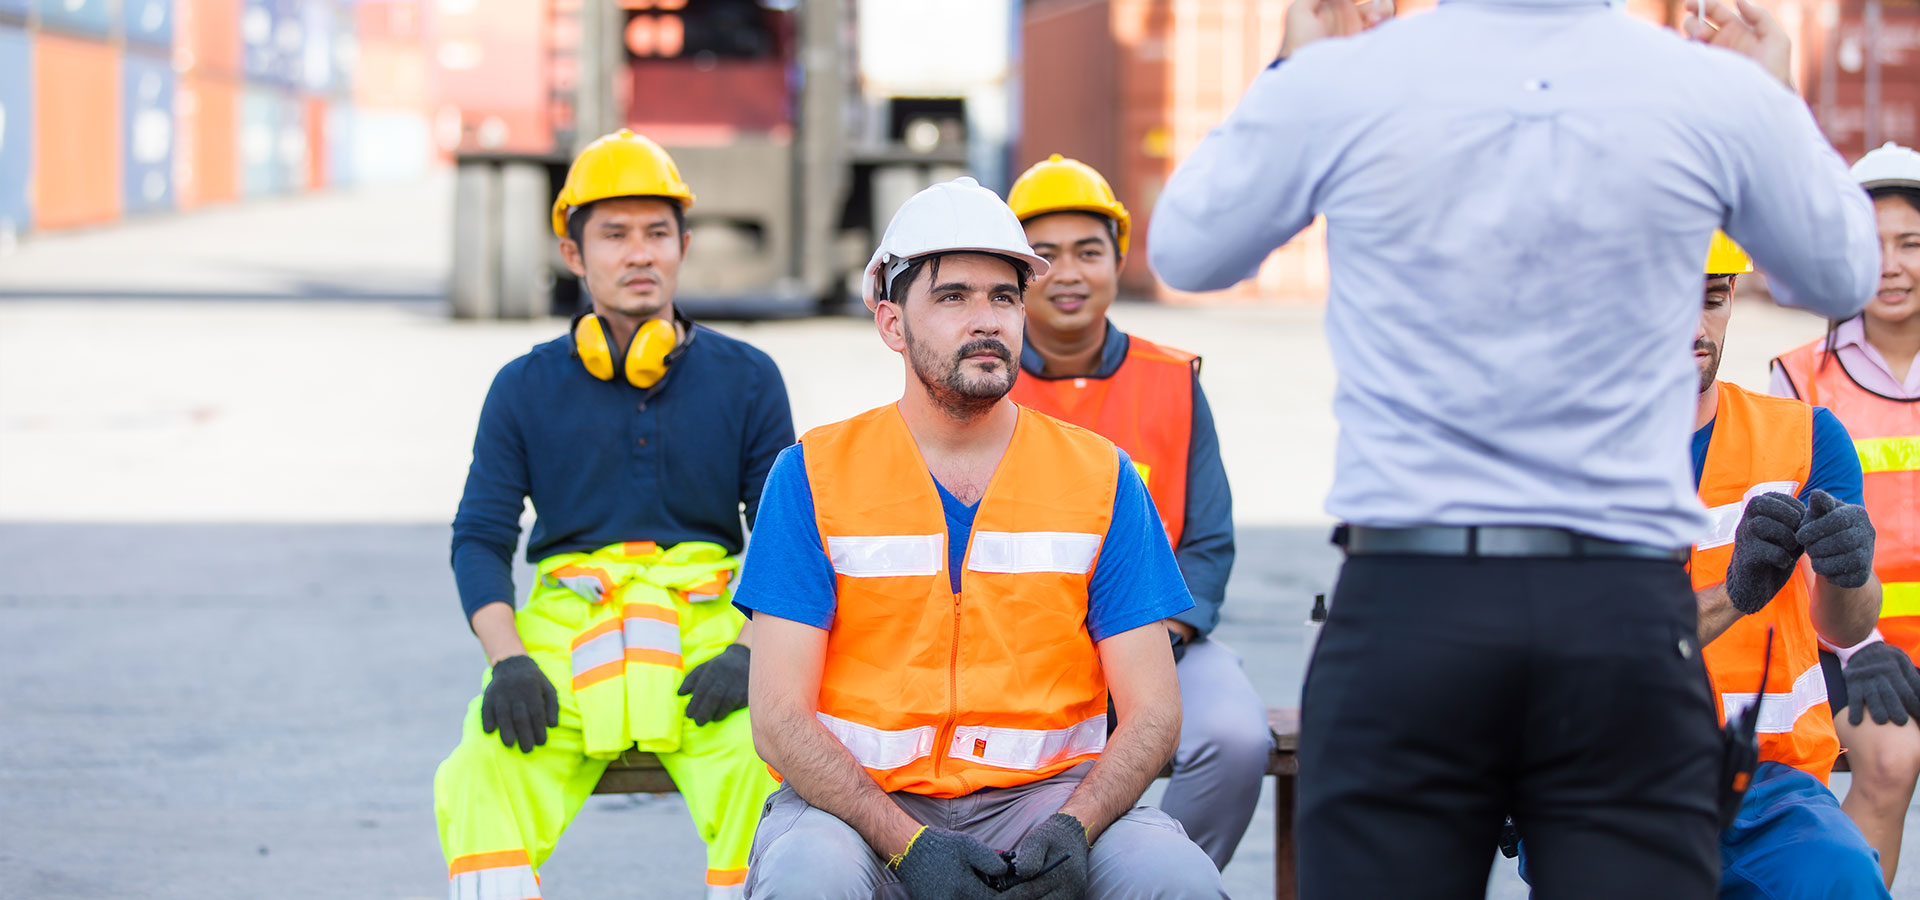 With changing demographics, construction training has evolved